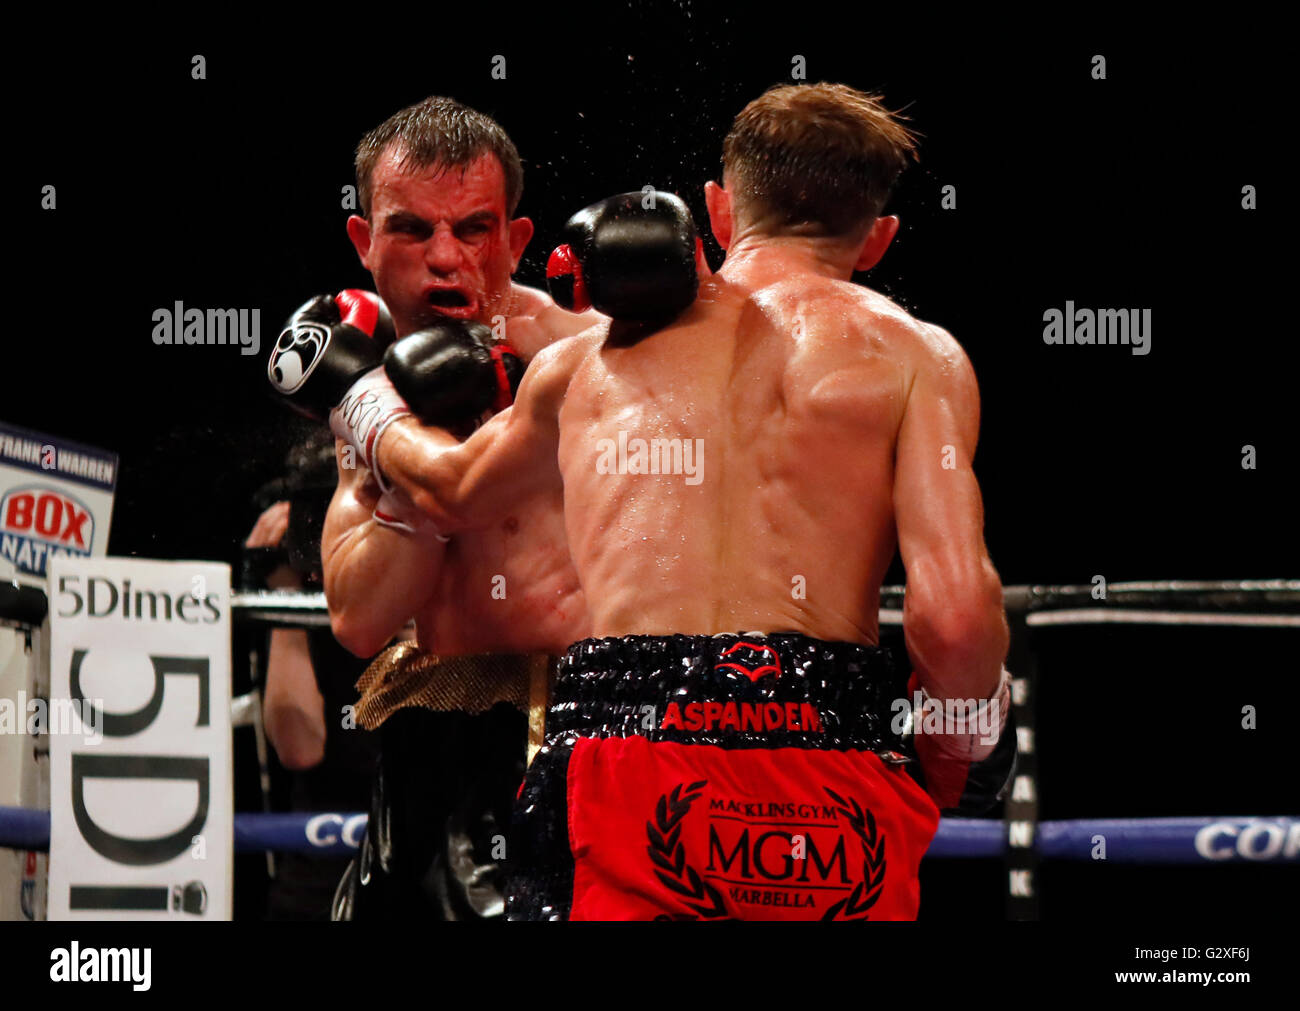 Thomas Stalker (right) fights Antonio Joao Bento at the Echo Arena, Liverpool. PRESS ASSOCIATION Photo. Picture date: Saturday June 4, 2016. See PA story boxing Liverpool. Photo credit should read: Peter Byrne/PA Wire Stock Photo